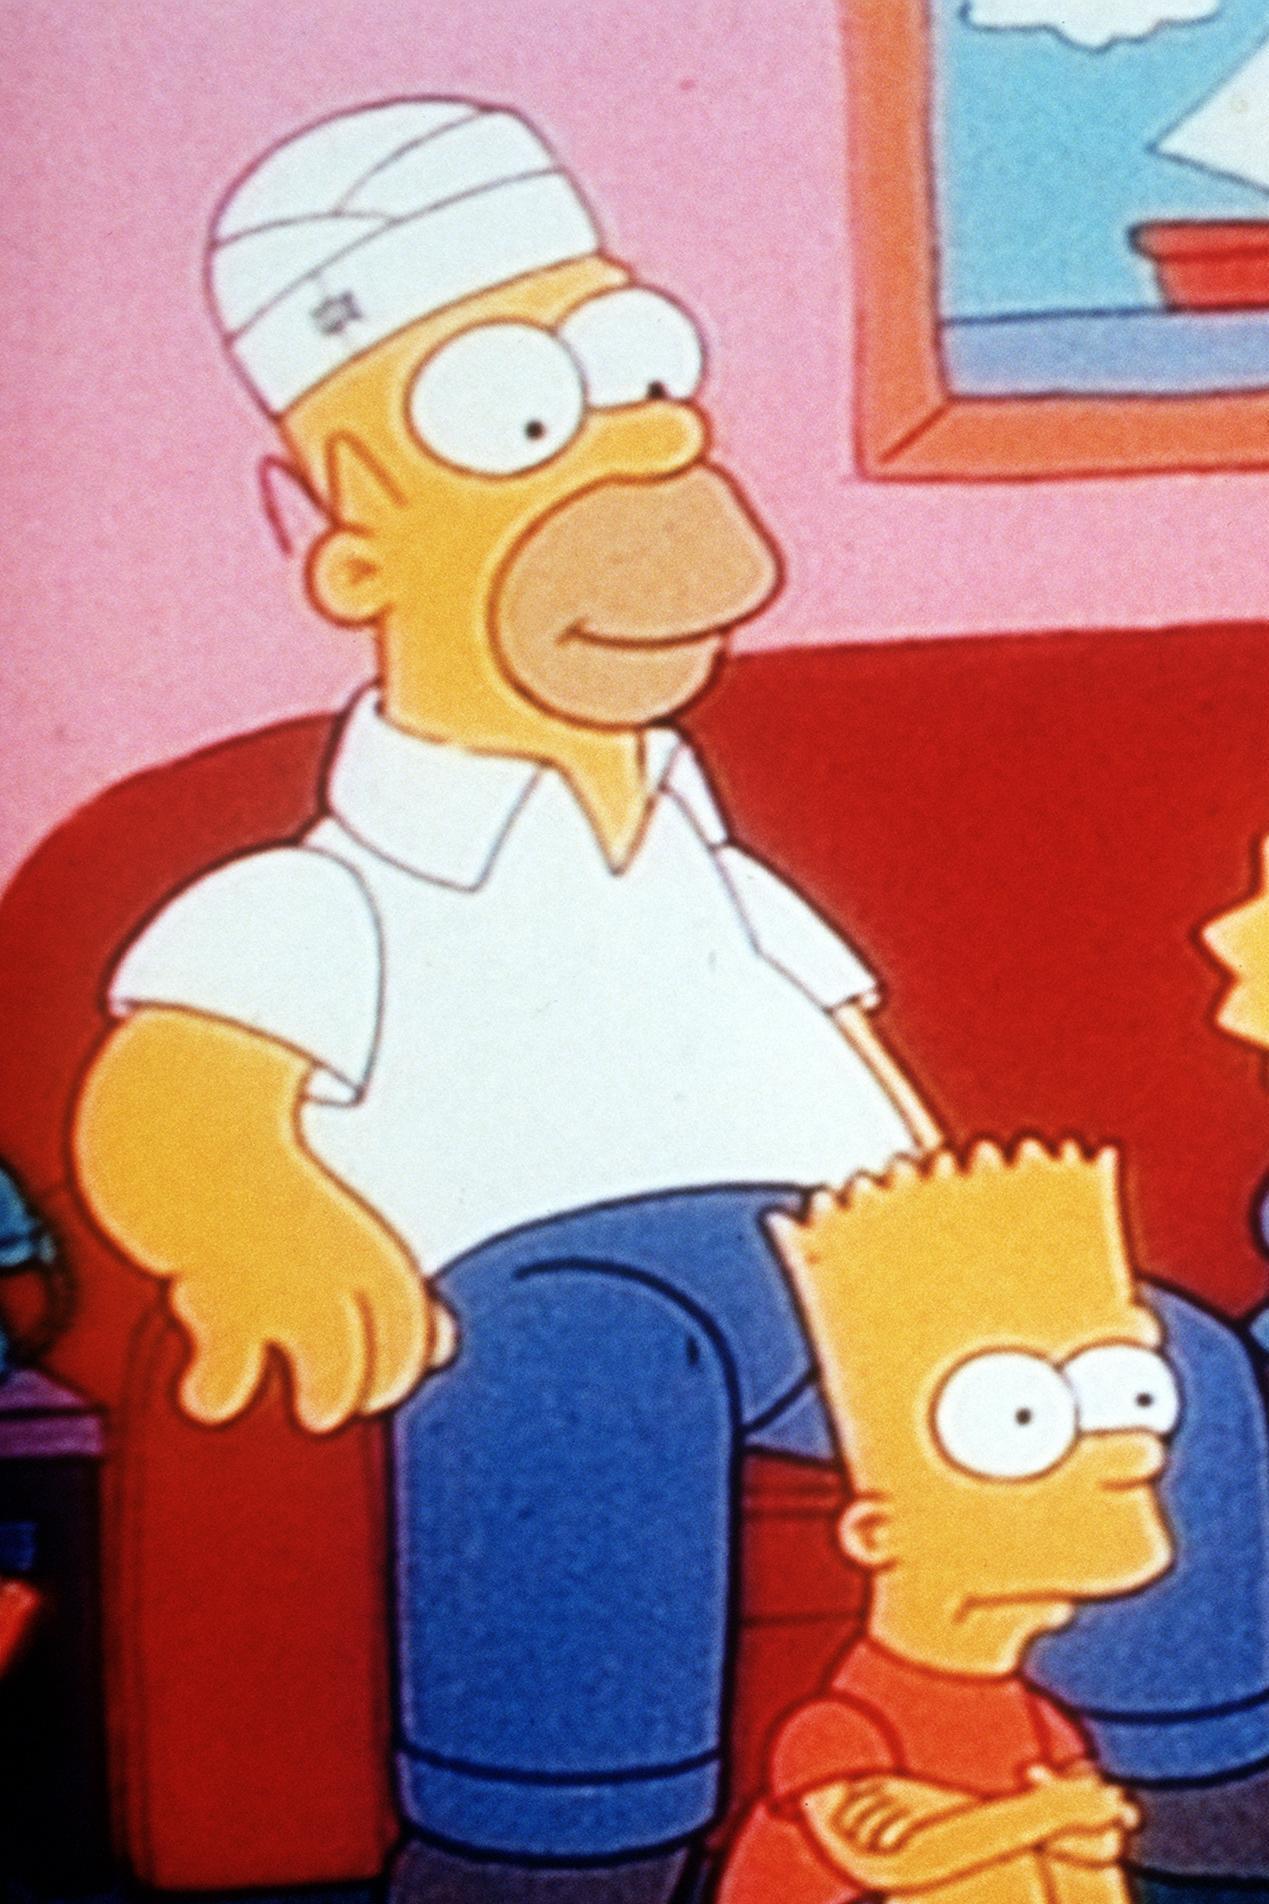 The Simpsons - Itchy and Scratchy and Marge